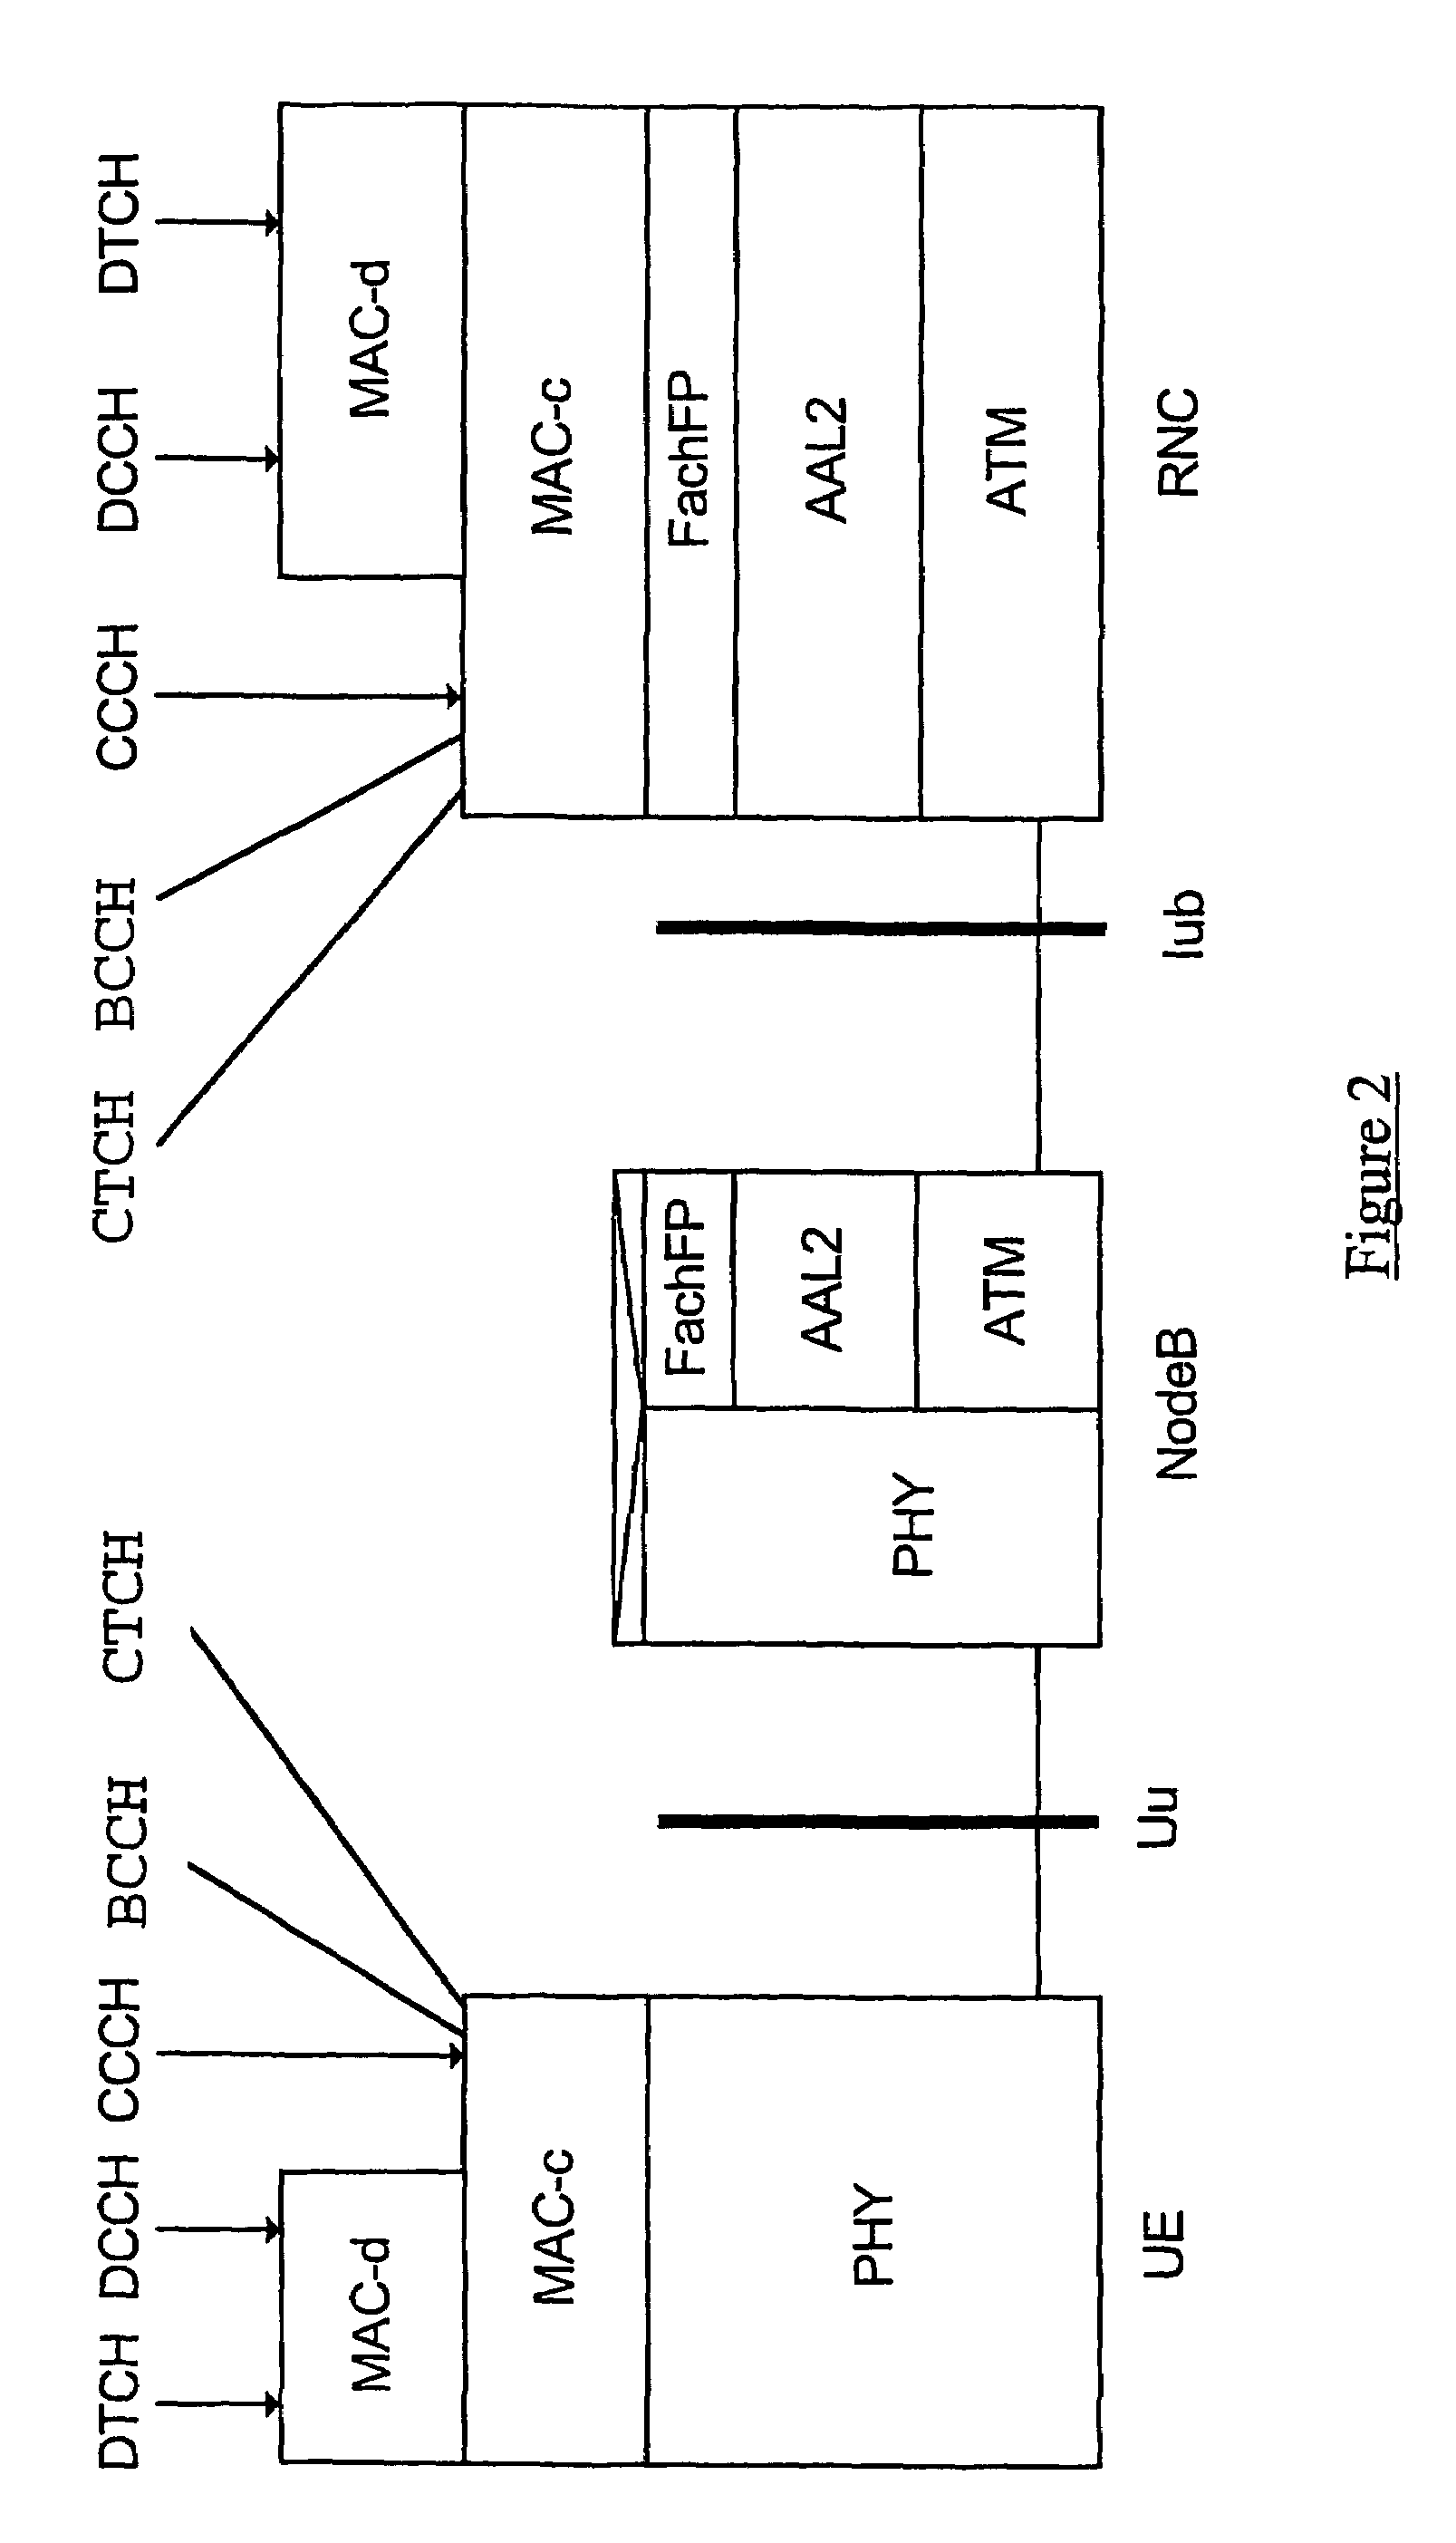 Controlling channel switching in a UMTS network